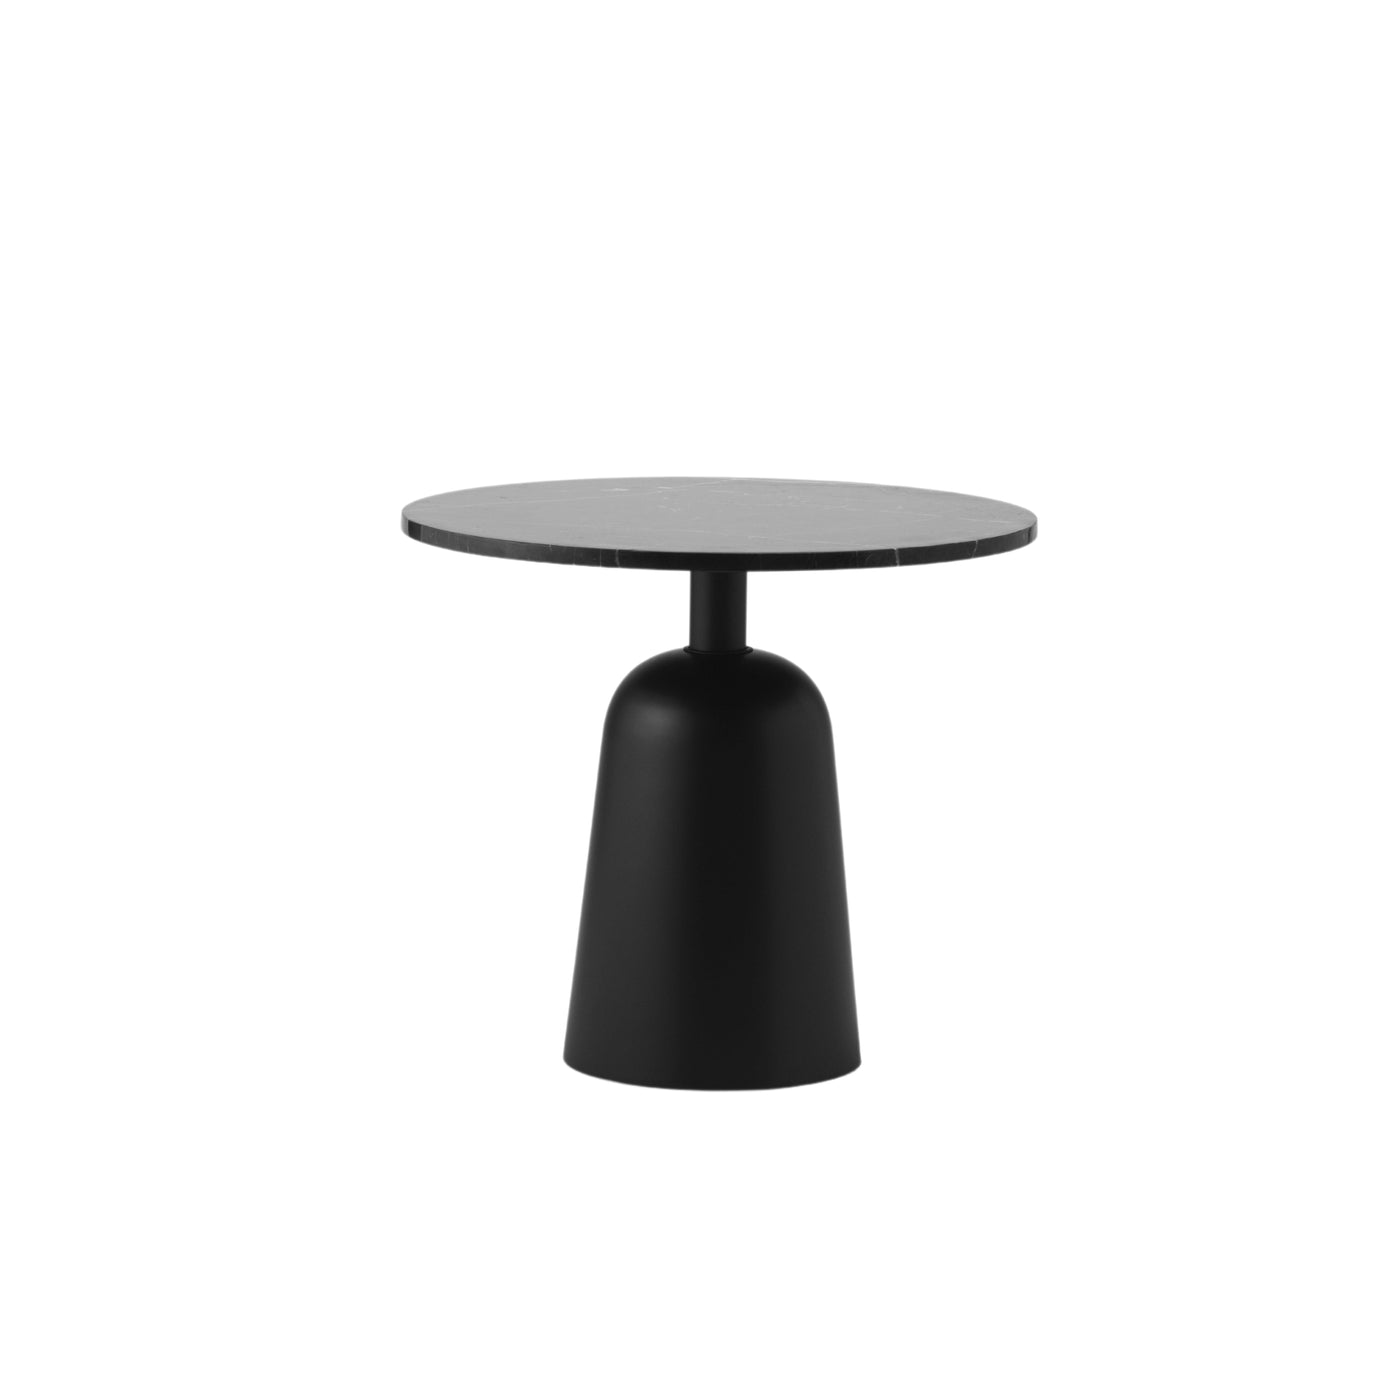 Normann Copenhagen Turn Table at someday designs. #colour_black-marble